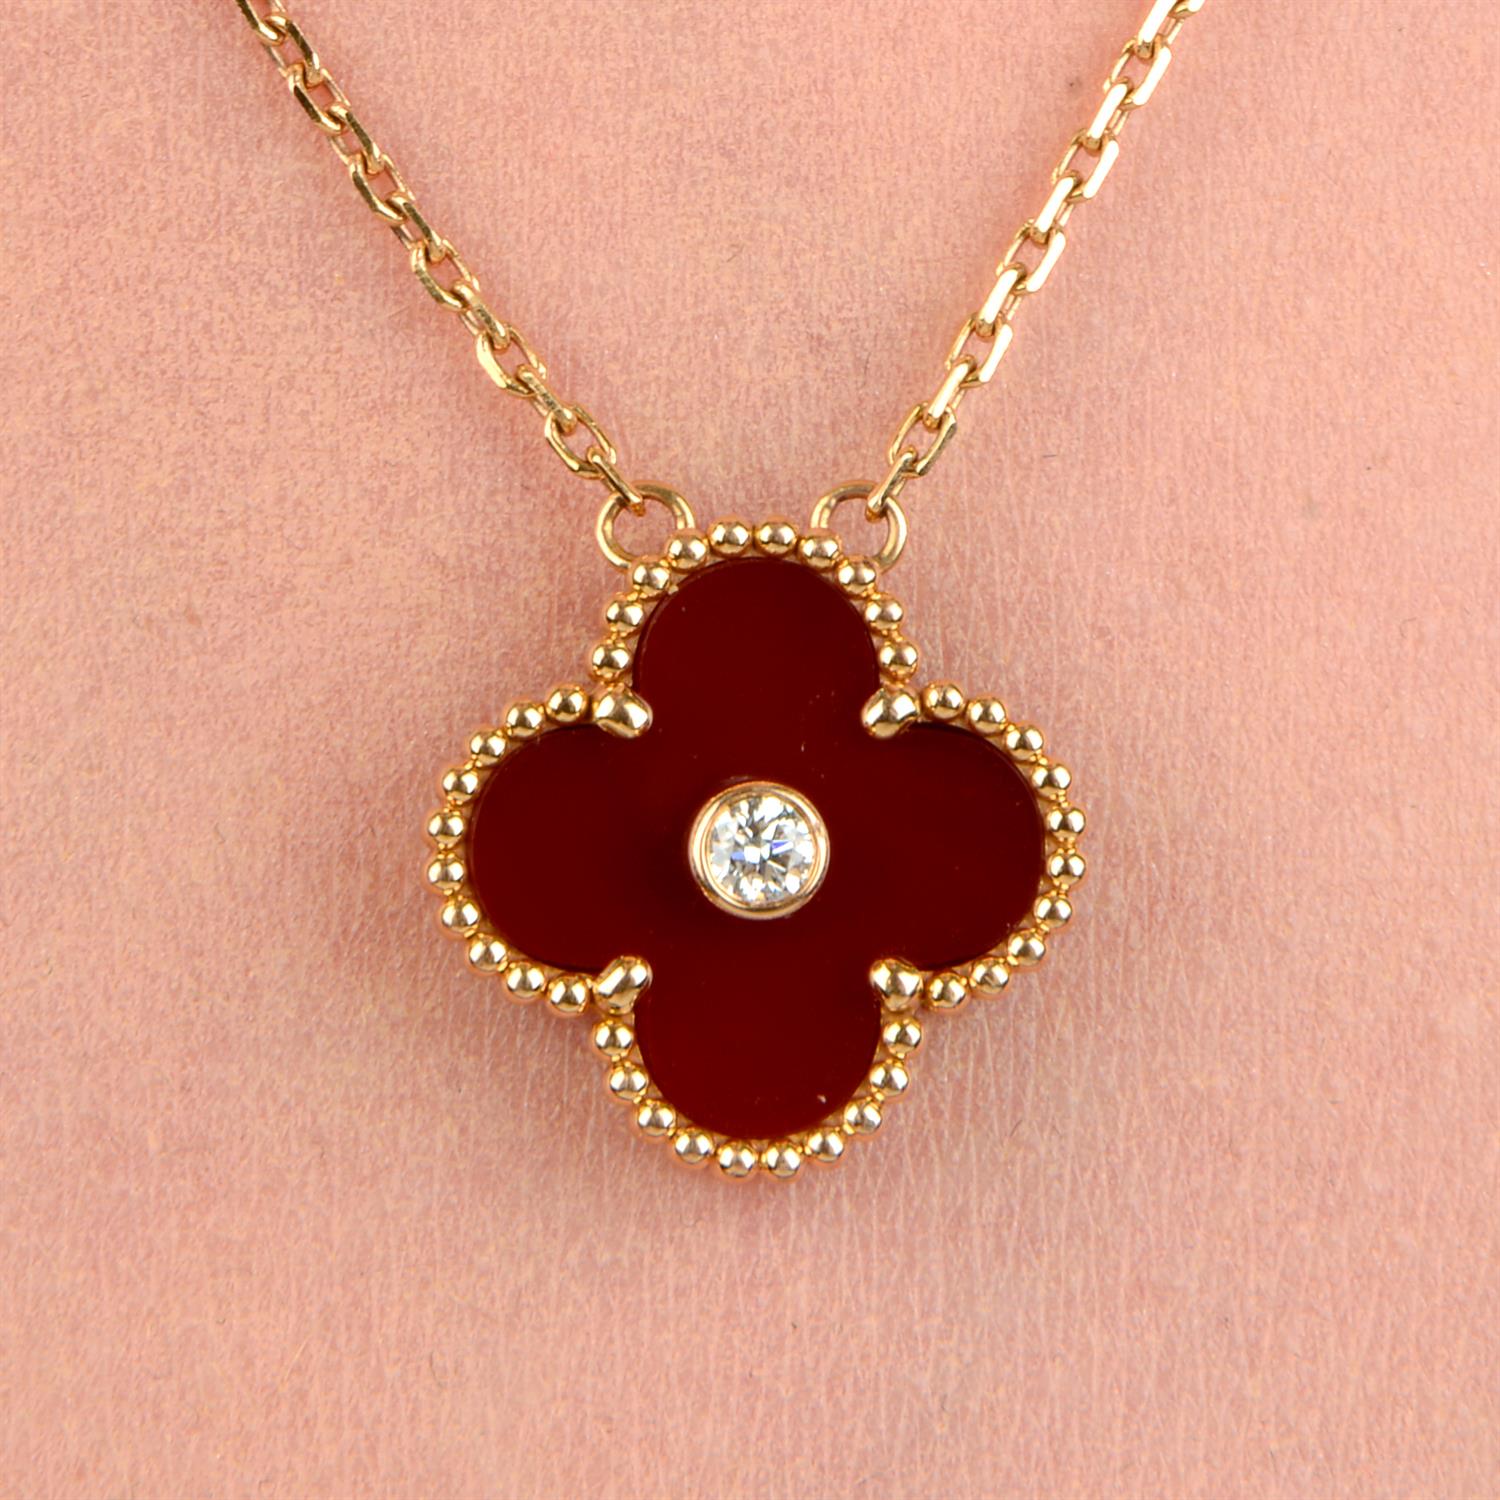 A carnelian and diamond 'Vintage Alhambra' necklace, by Van Cleef & Arpels.